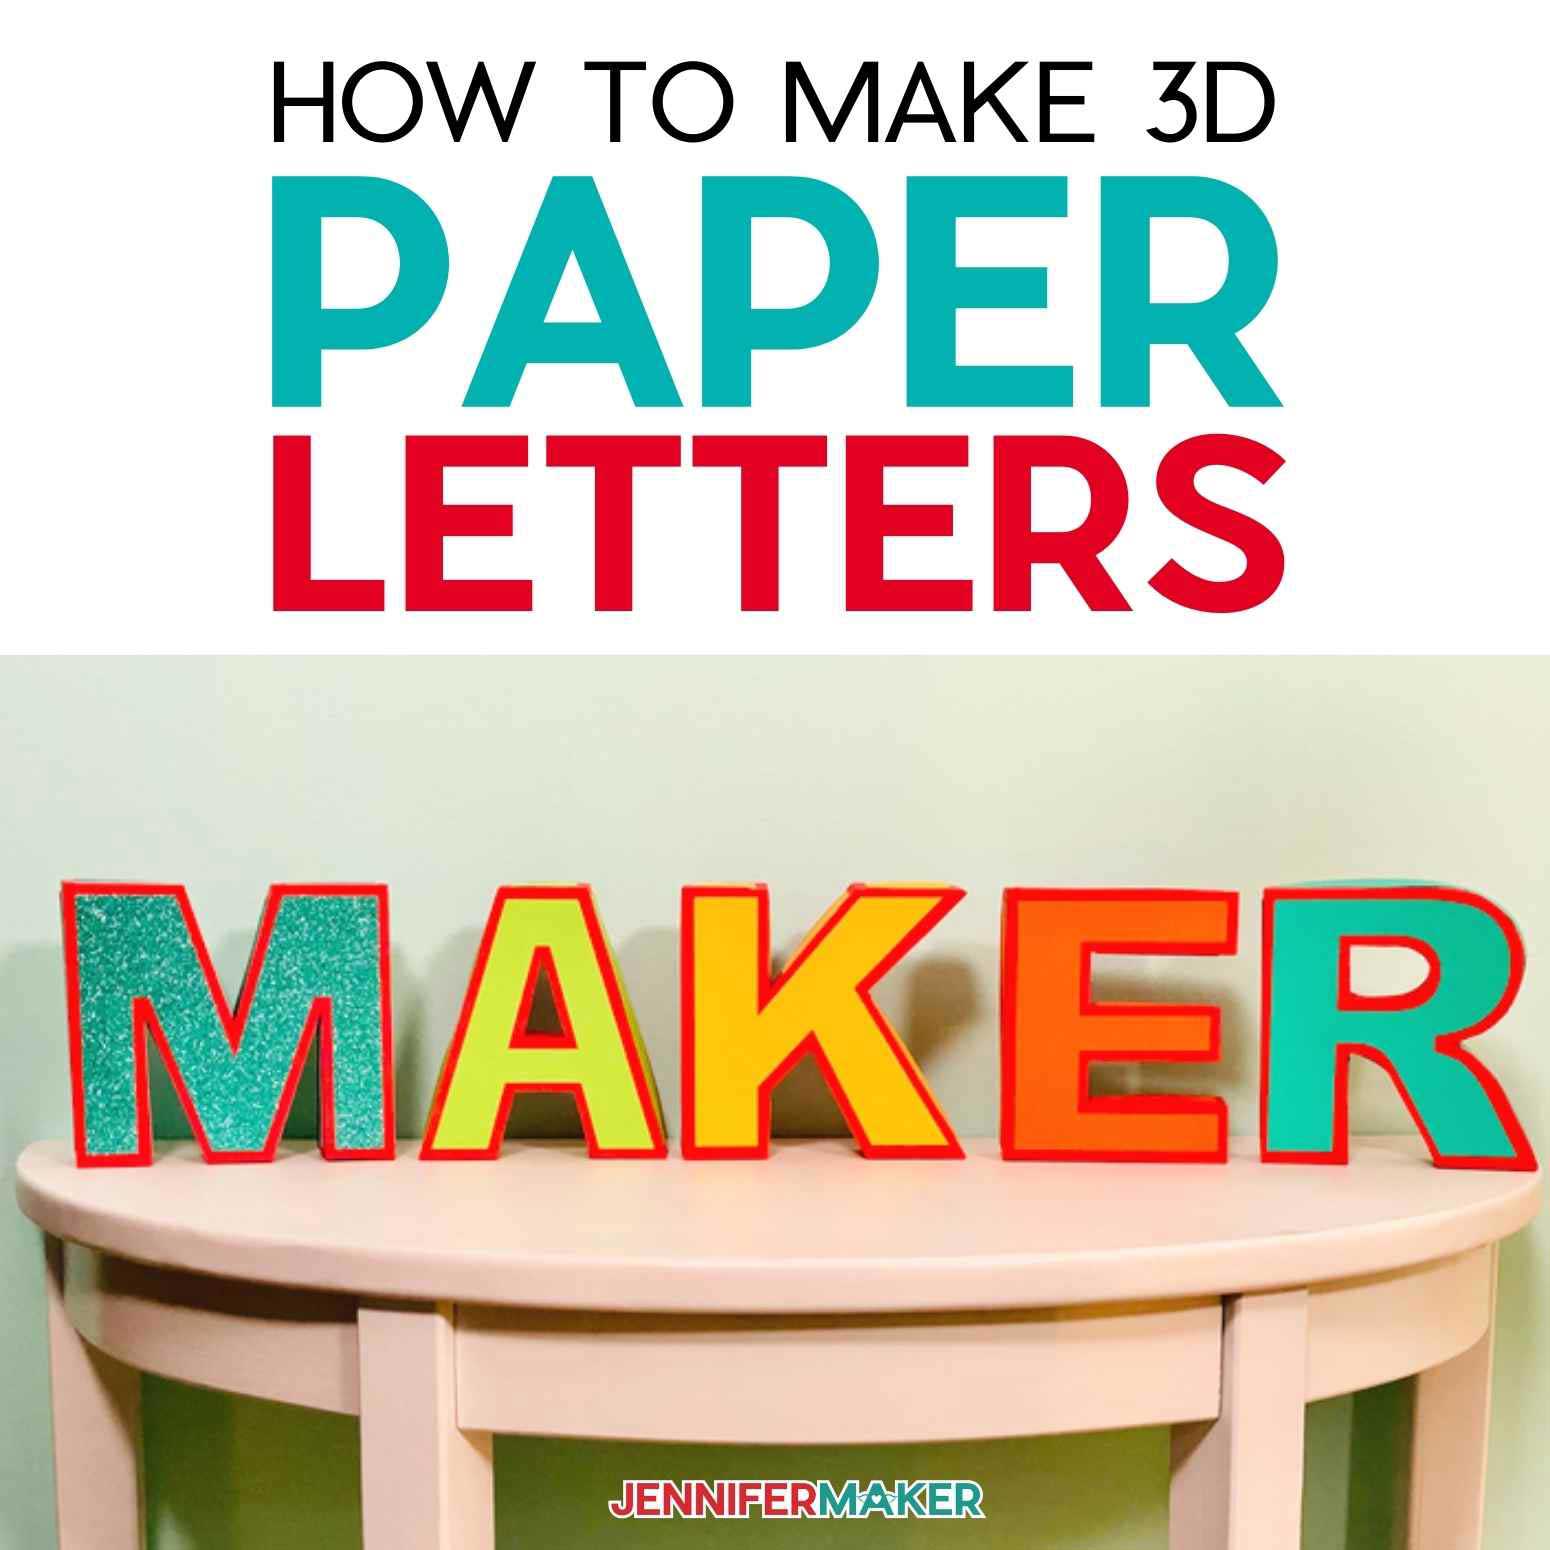 Decorative 3D Paper Letters on a wooden table spelling MAKER below the text "How to Make 3D Paper Letters"